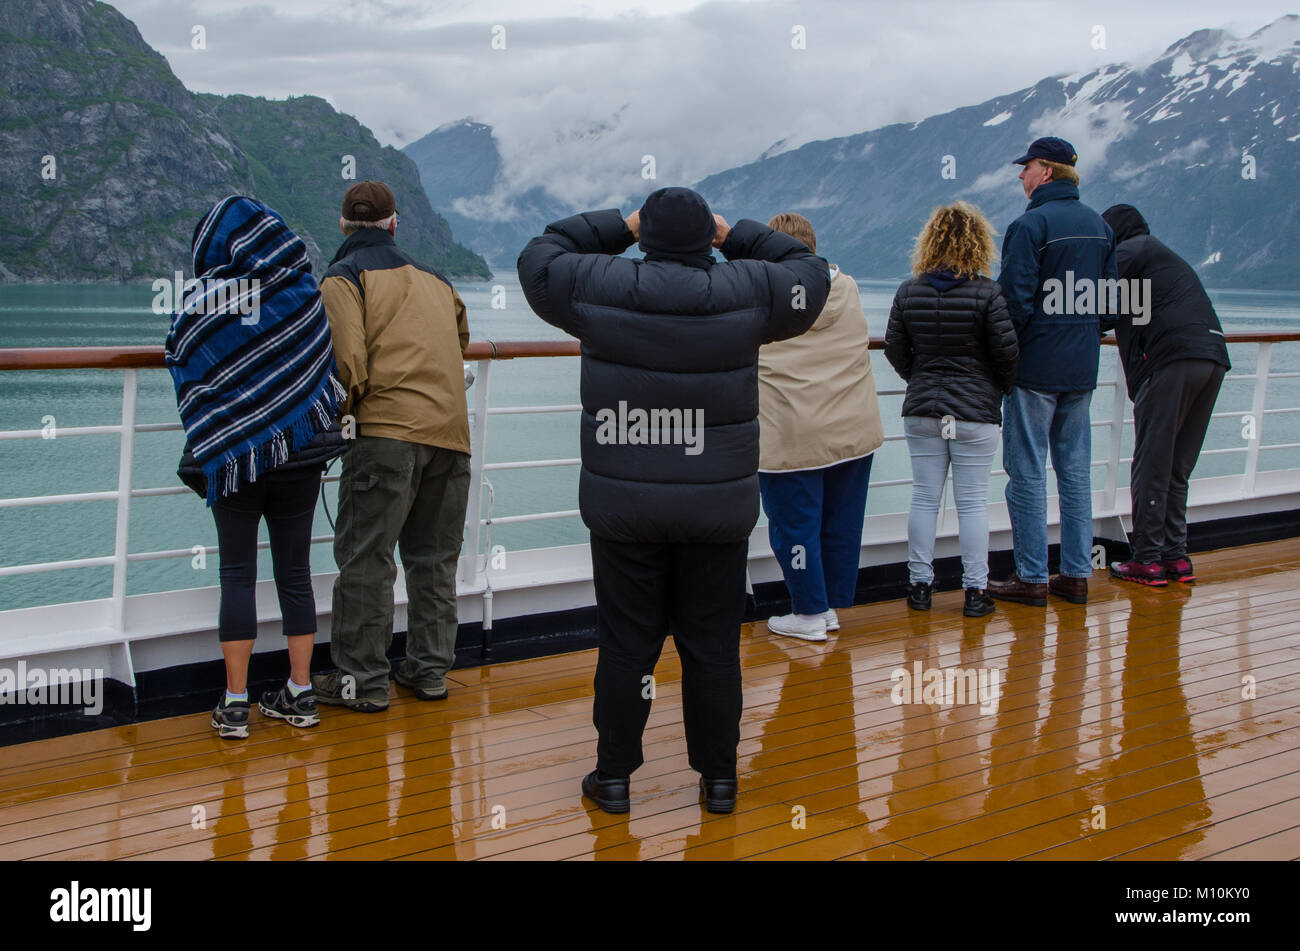 Small group of passengers standing by deck railing look out at scenic landscape on Alaska cruise - Glacier National Park, Alaska Stock Photo